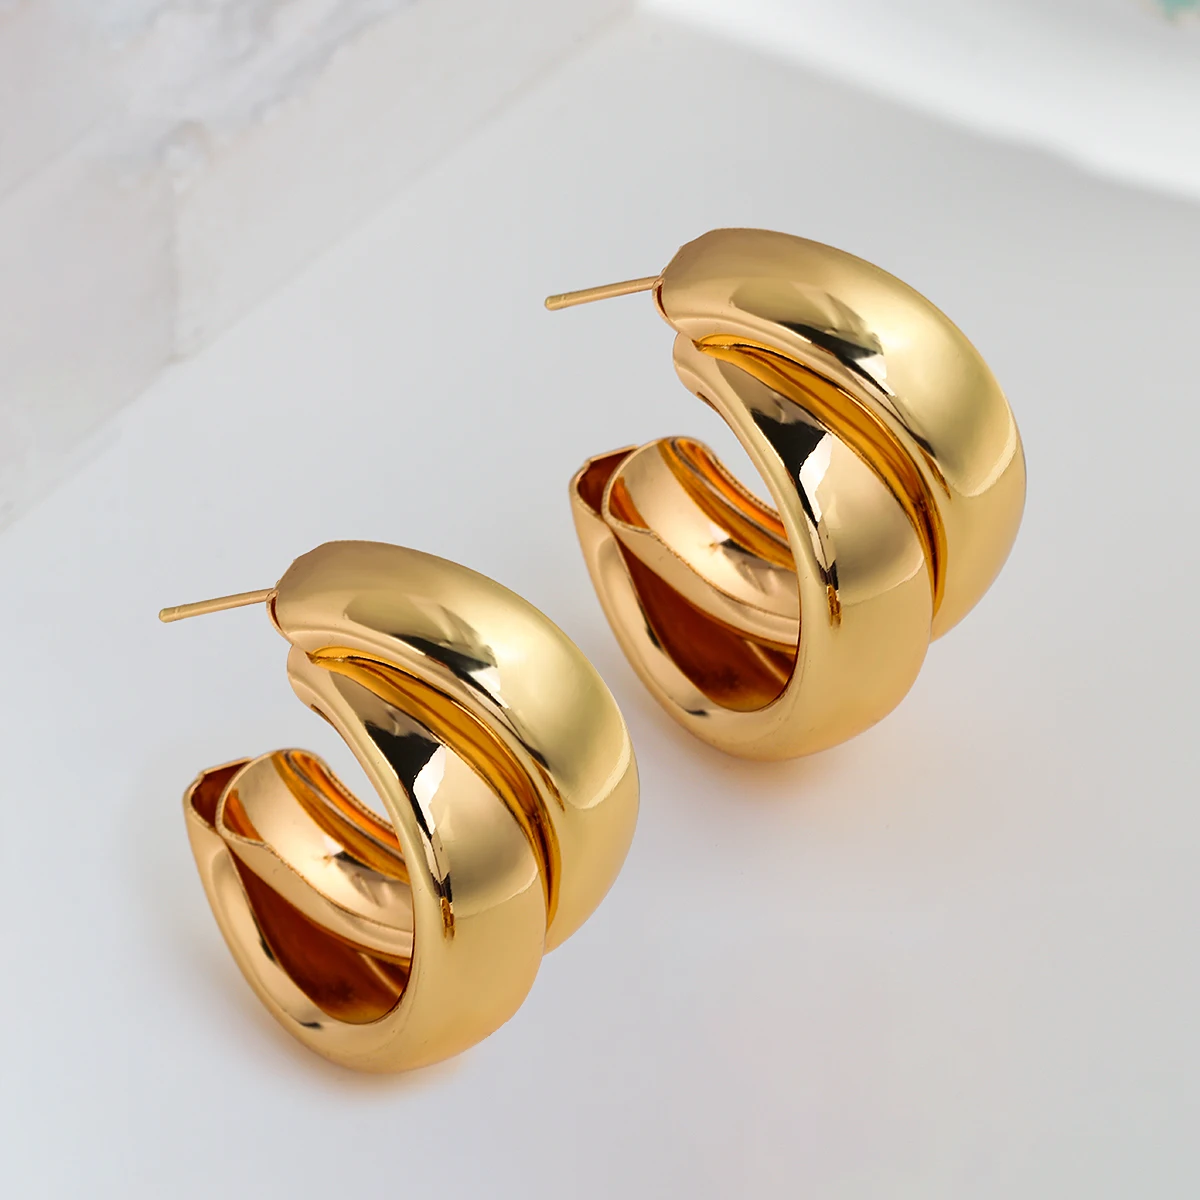 

AENSOA Fashion 2022 Round Circle Geometric Hoop Earrings for Women Vintage Gold Color Wedding Party Statement Earrings Jewelry